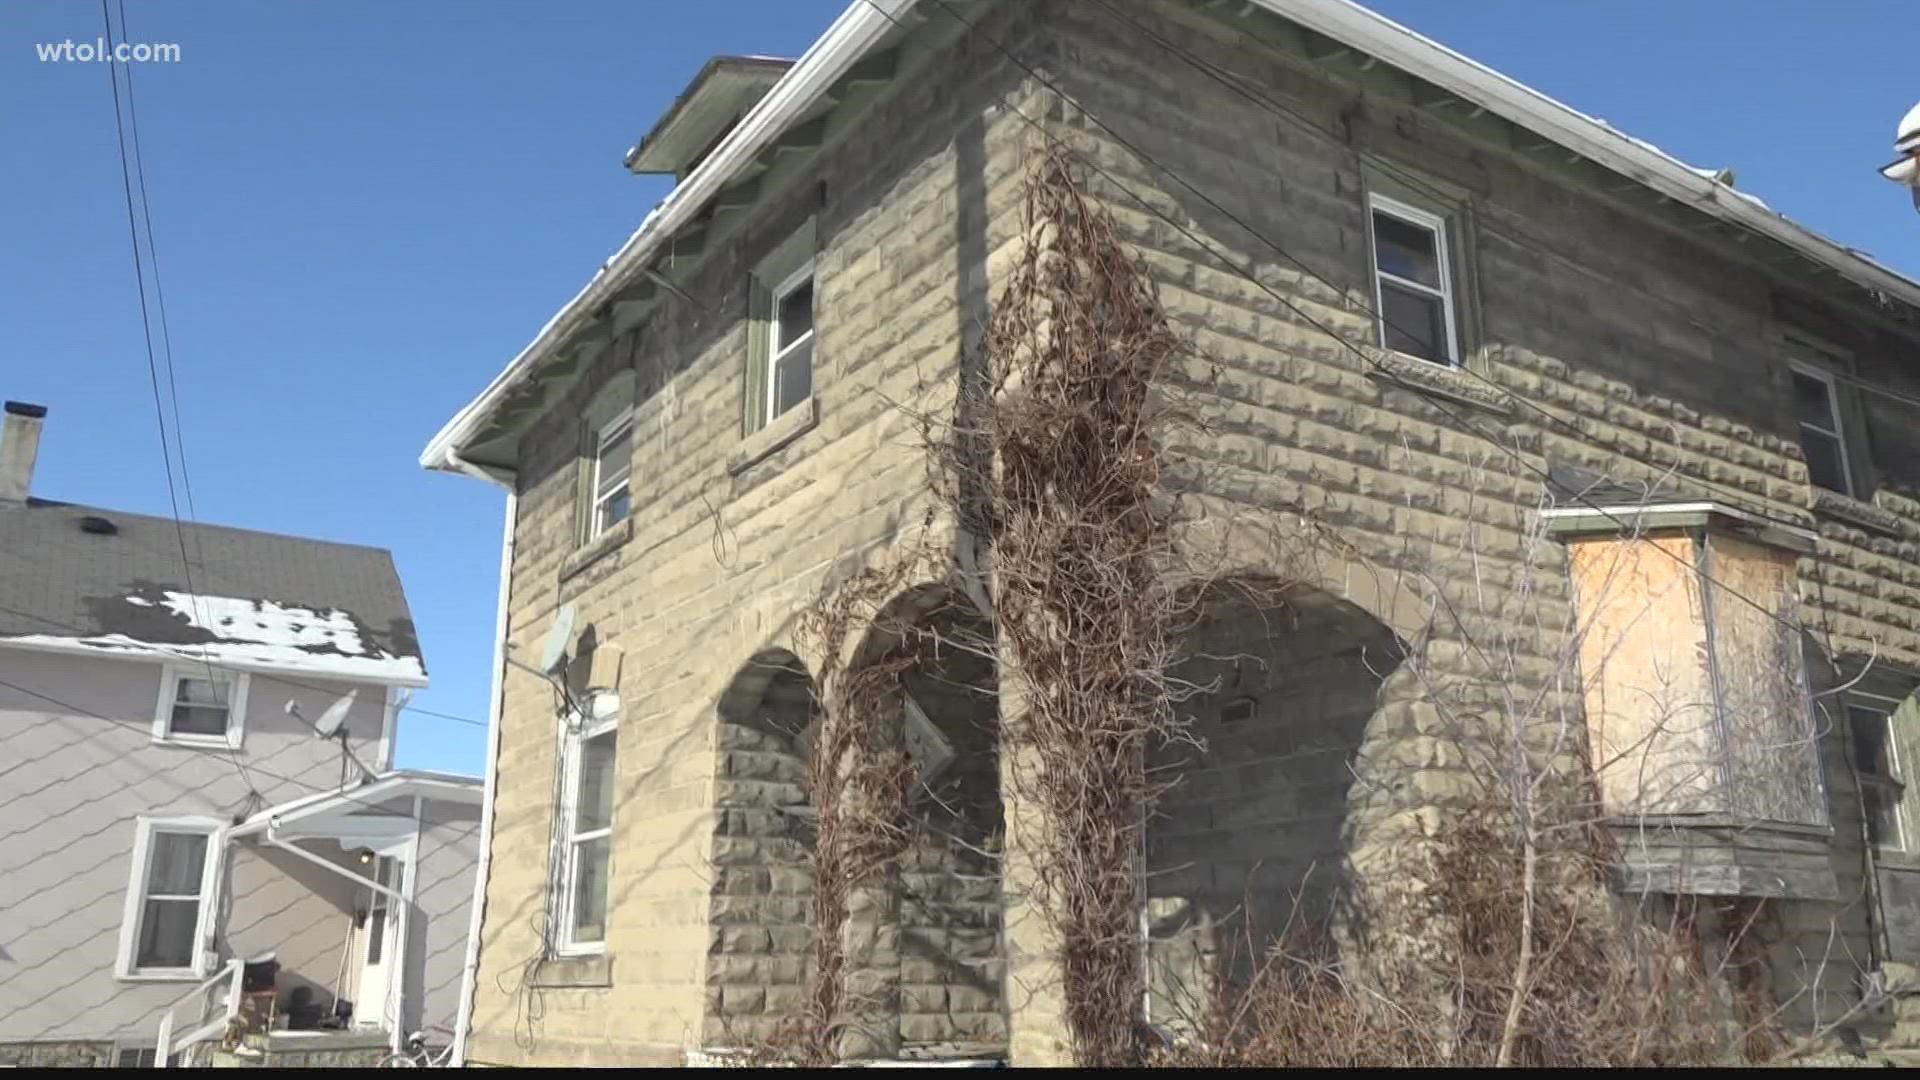 Fremont Mayor Danny Sanchez hopes the program can demolish up to 12 vacant homes a year.